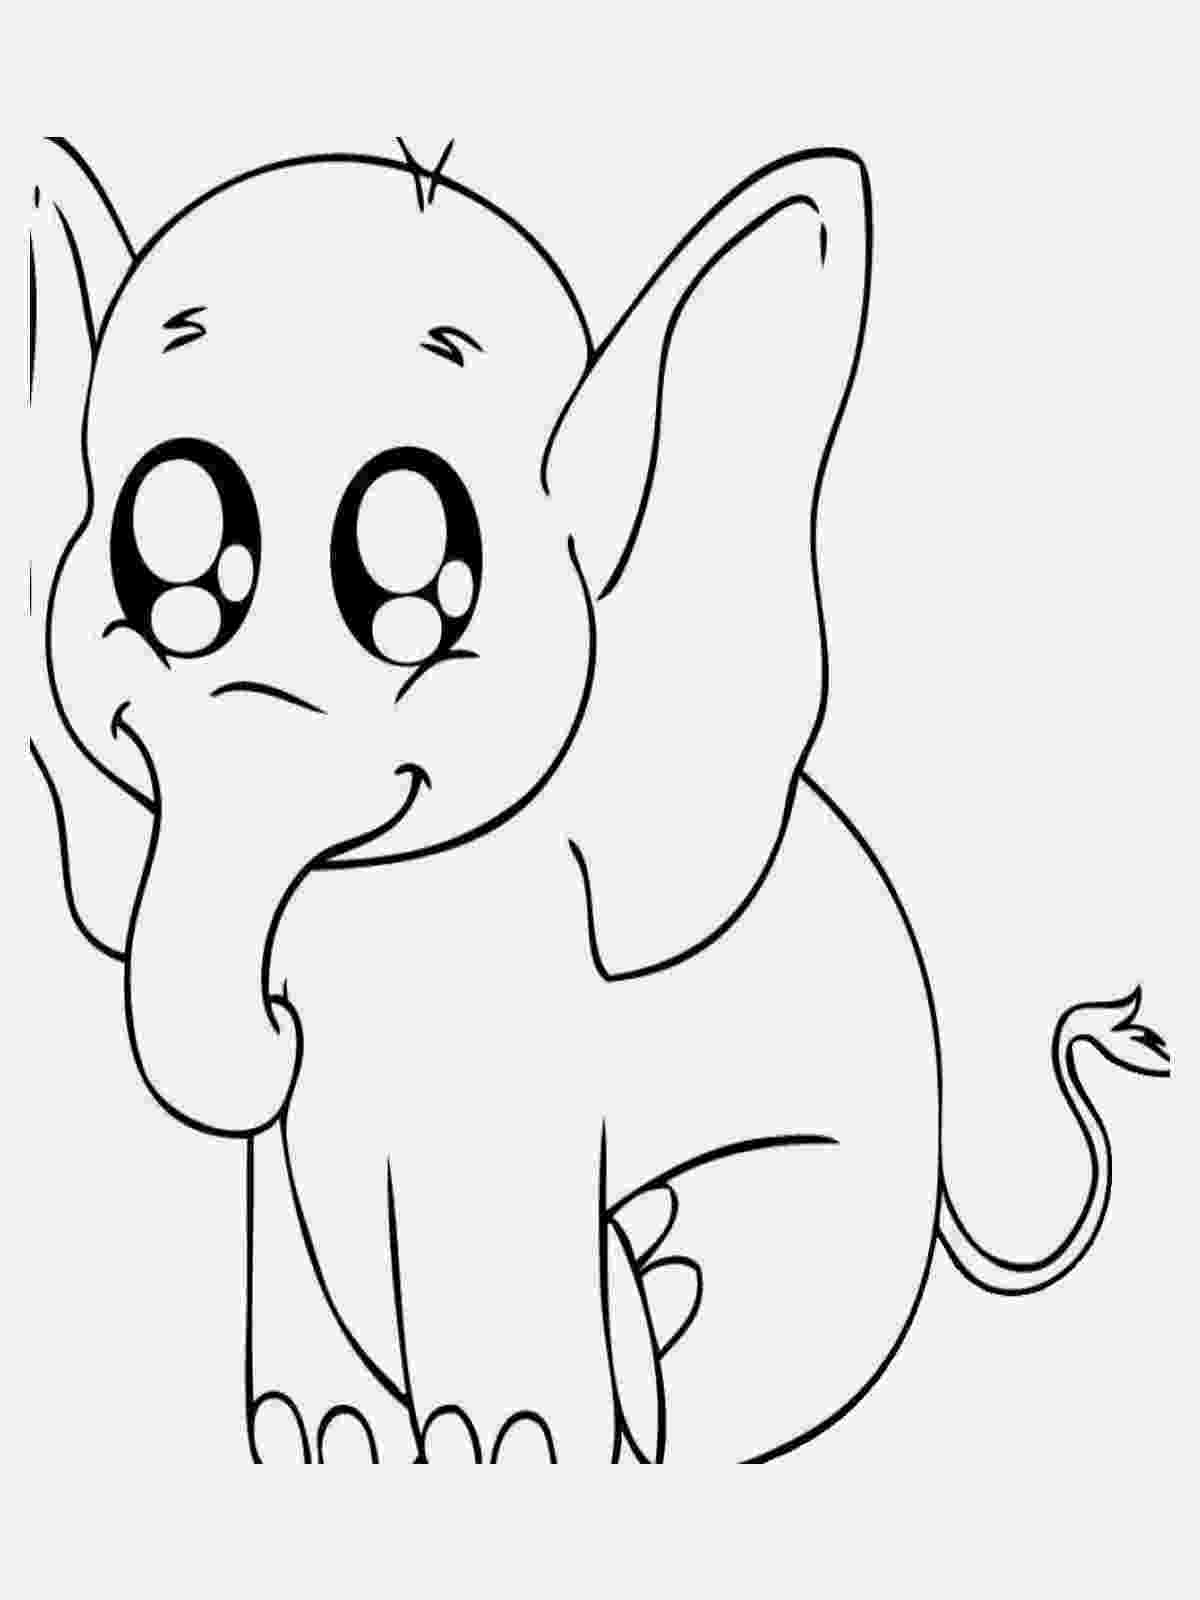 easy coloring pages to print easy coloring pages best coloring pages for kids coloring pages to print easy 